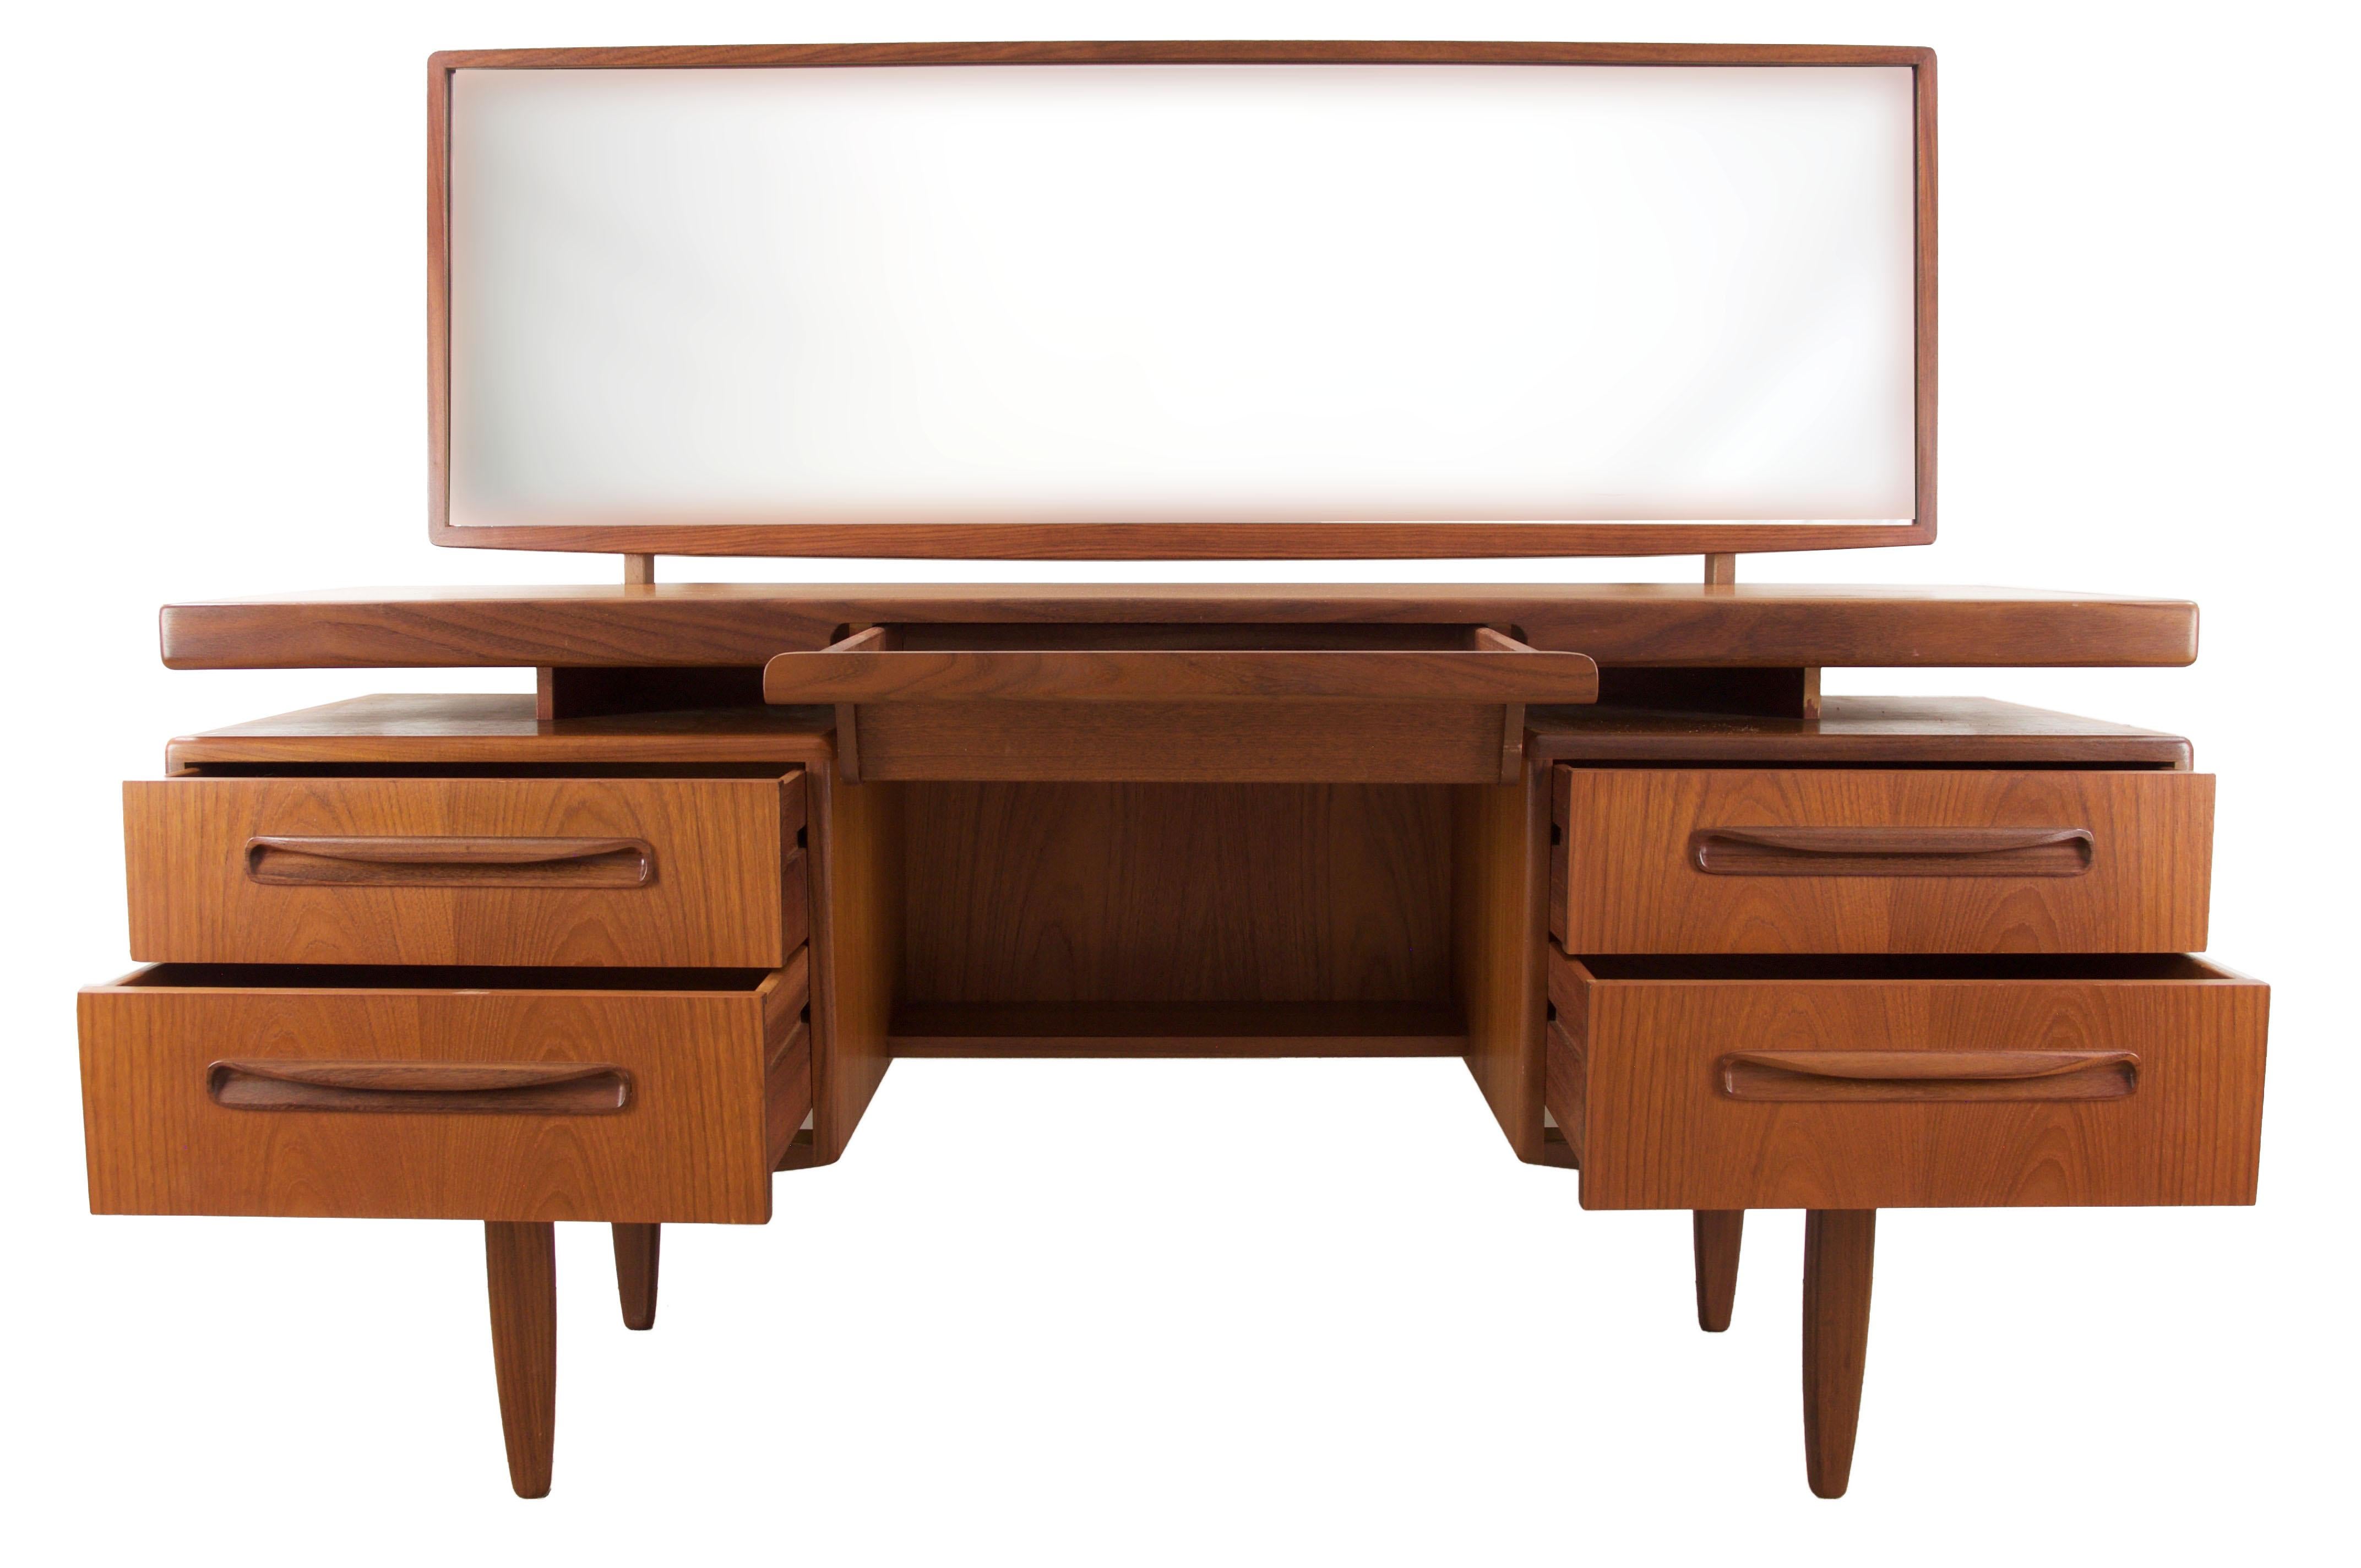 Beautiful five-drawer 1960s teak dressing table or vanity by G-Plan in outstanding condition. Designed by Victor Bramwell Wilkins for G-Plan during the Mid-Century Modern era in Britain. Bramwell was well known for his 